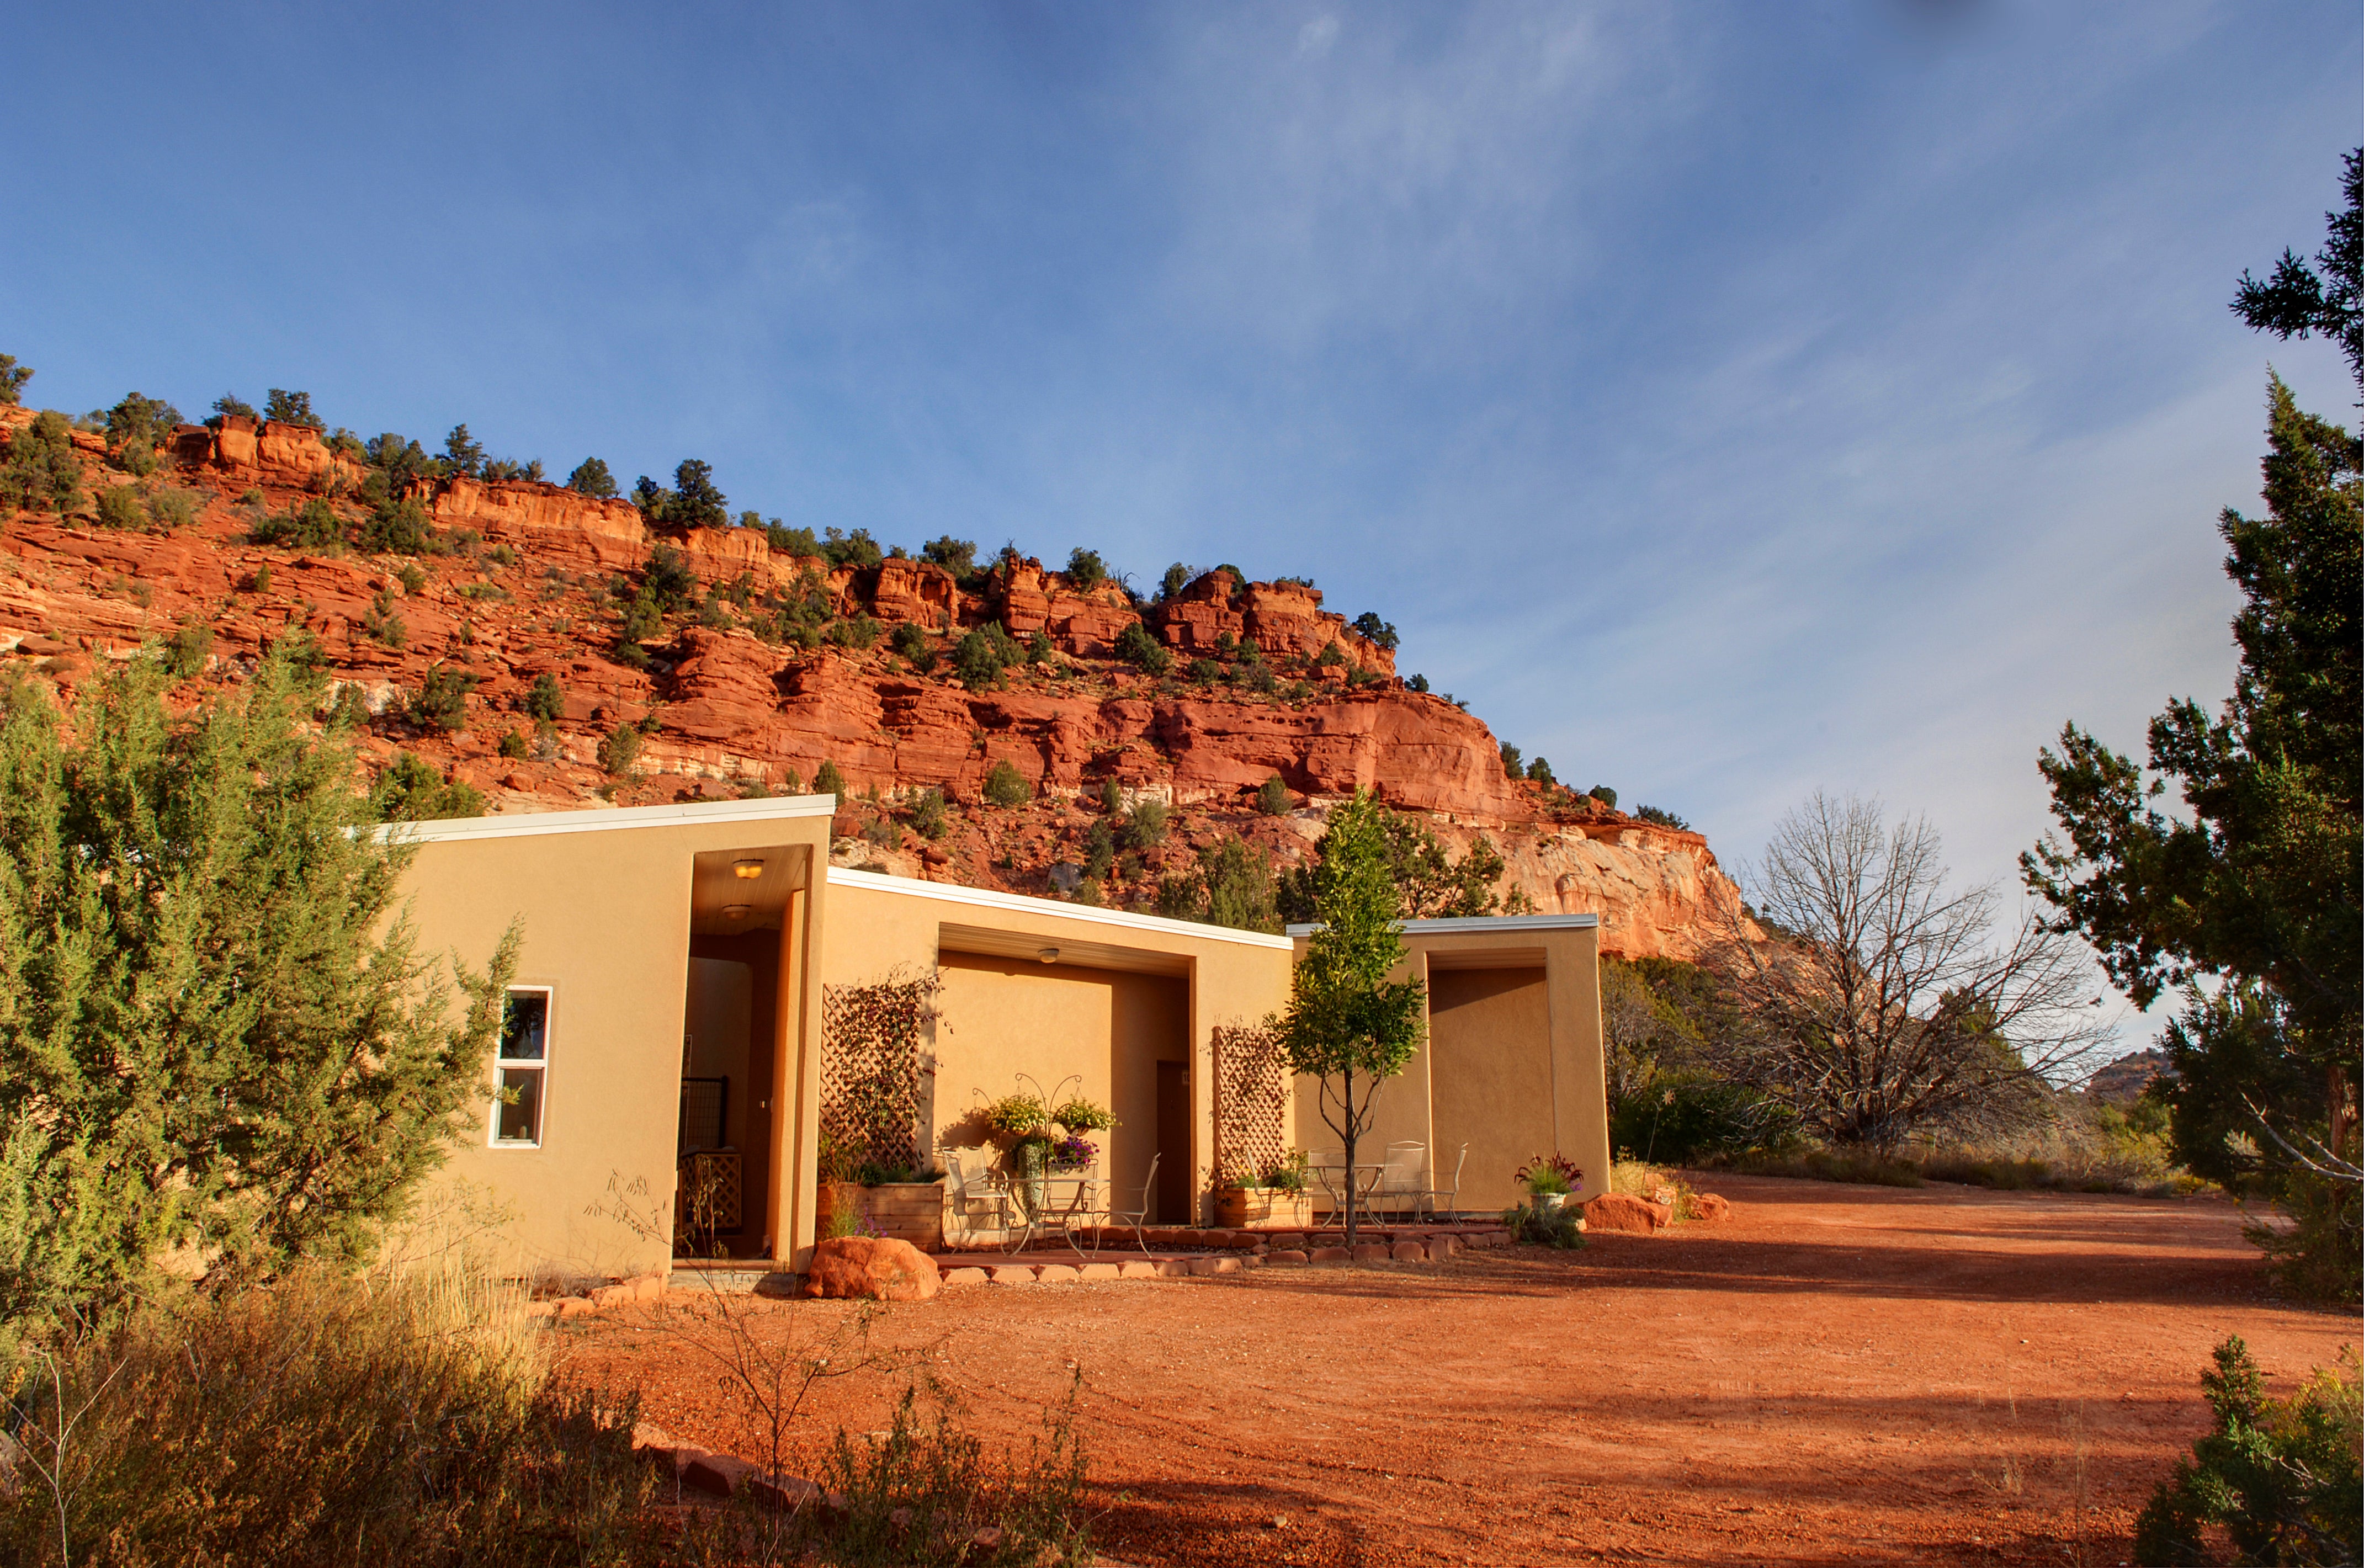 Small tan building with a backdrop of red rock cliffs and blue sky